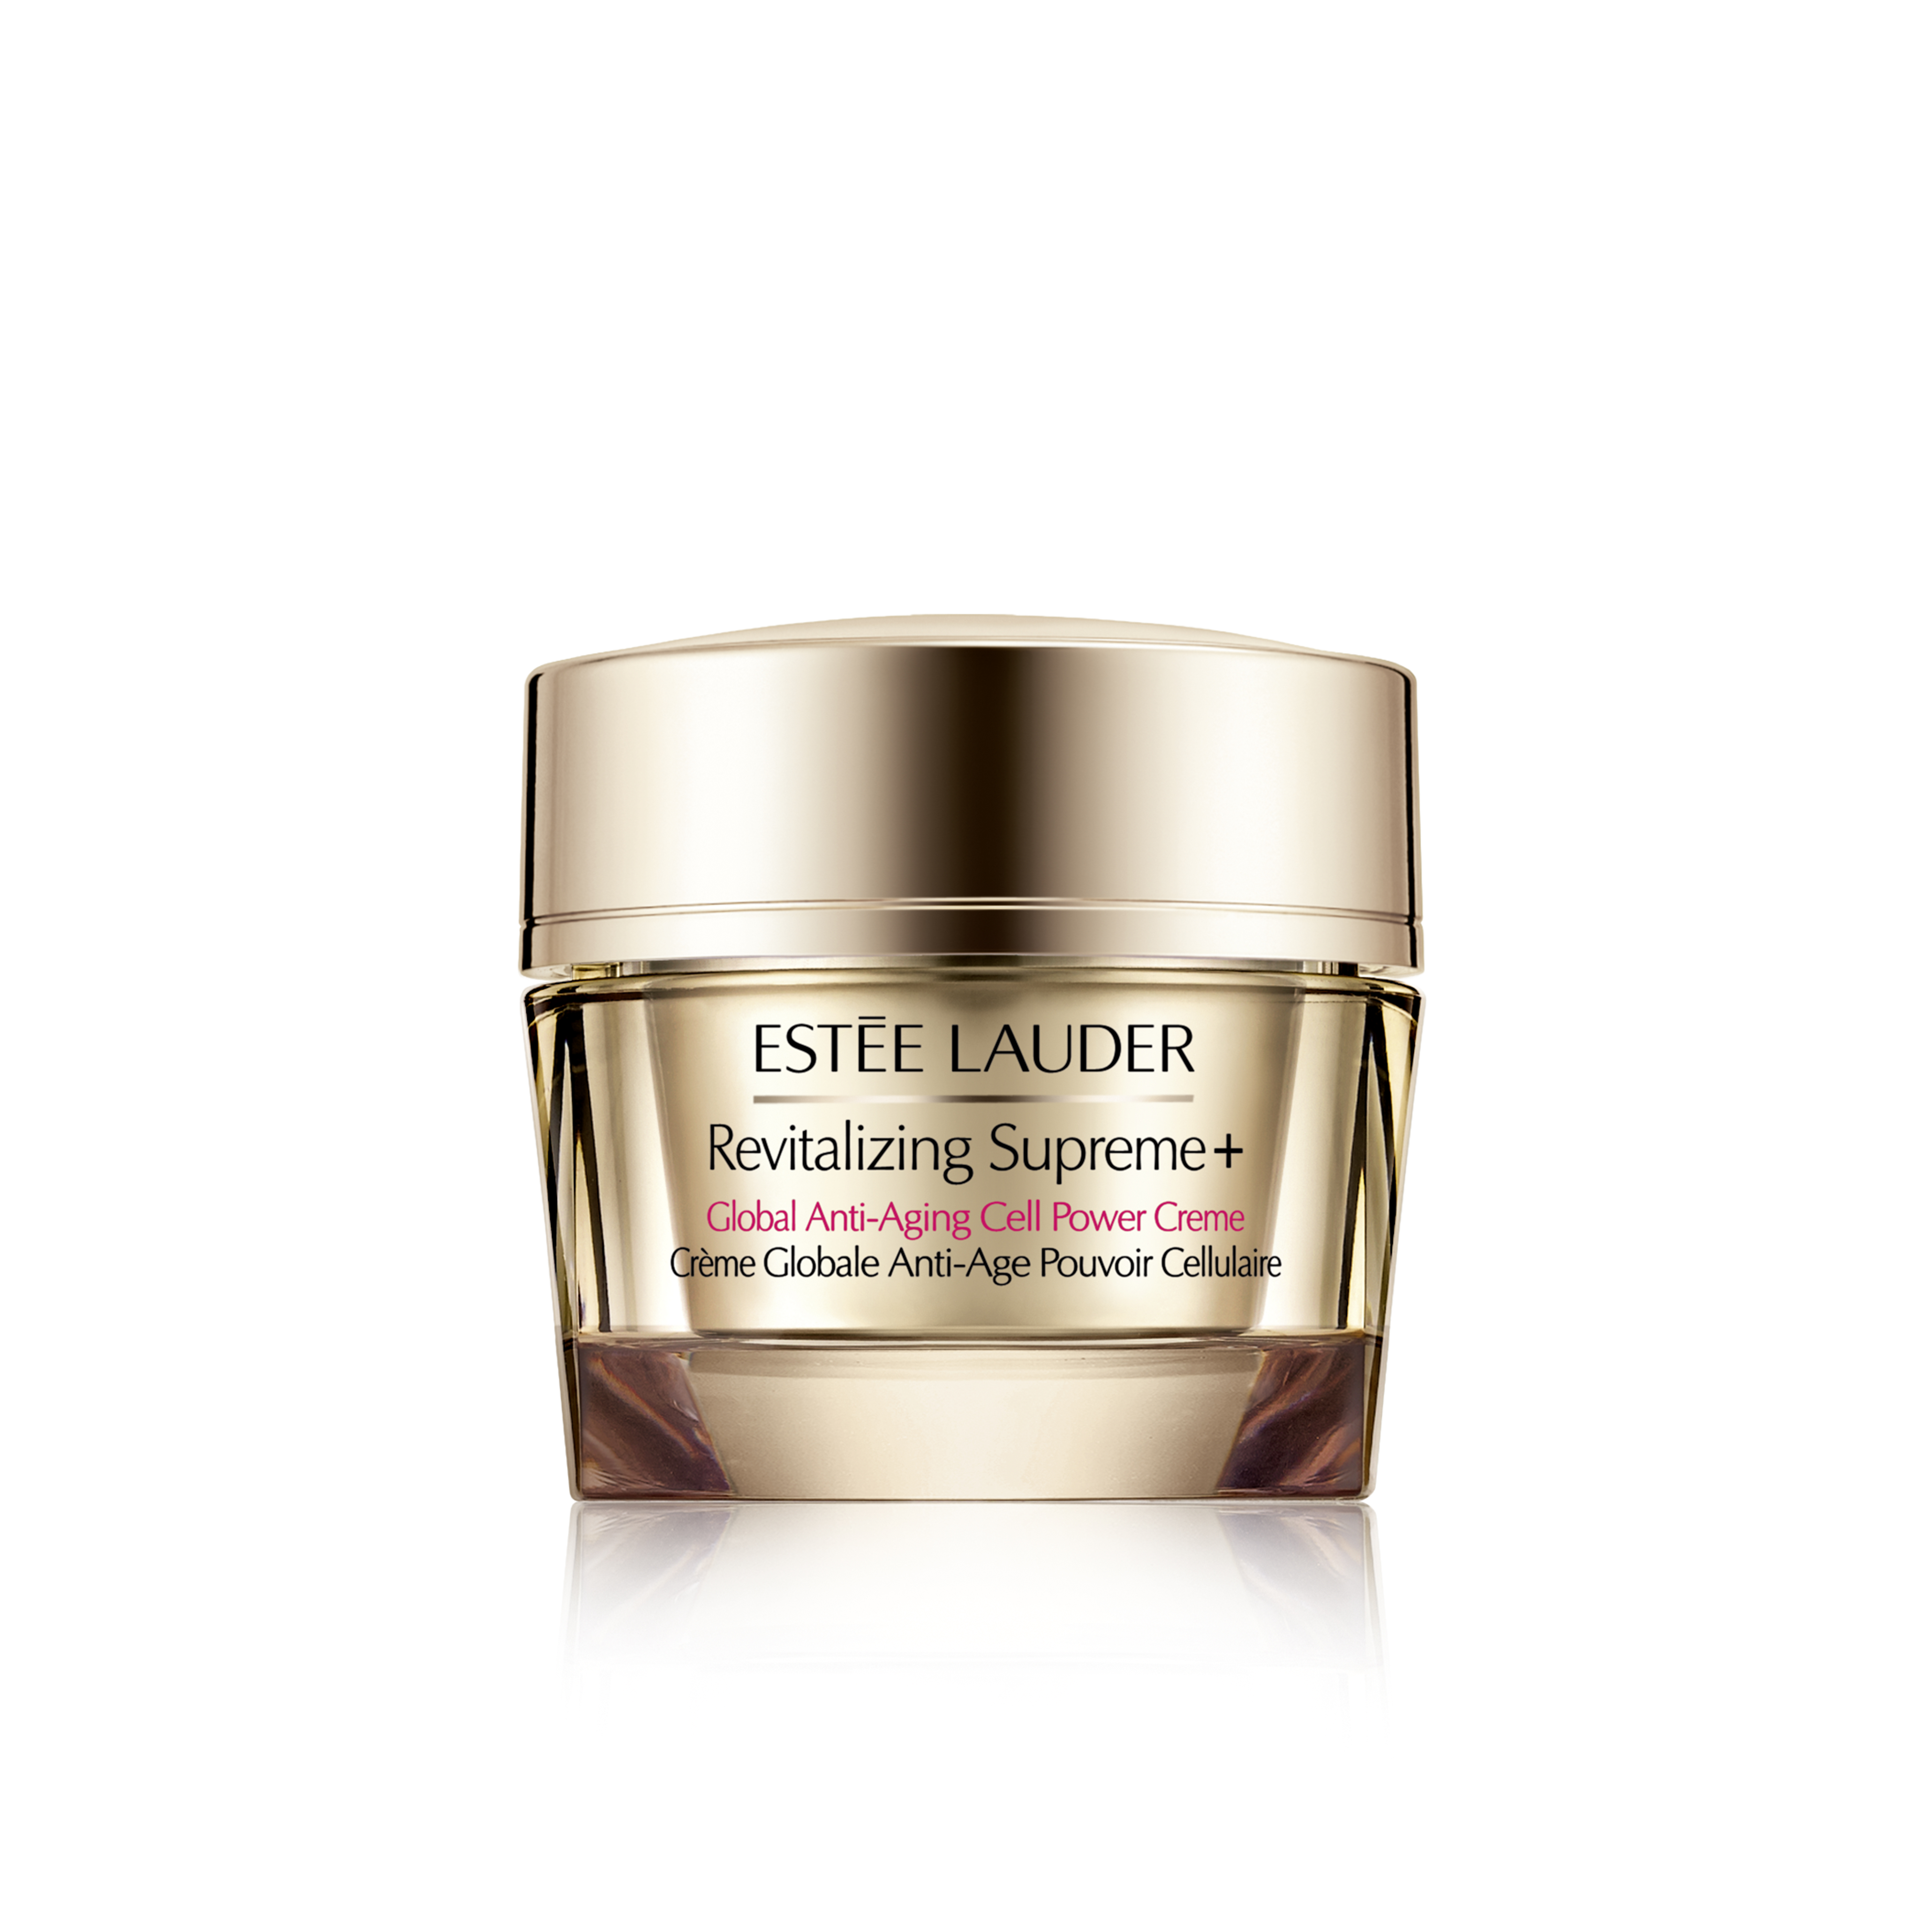 Moringa extract is the key ingredient in Estée Lauder Revitalising Supreme + Global Anti-Aging collection